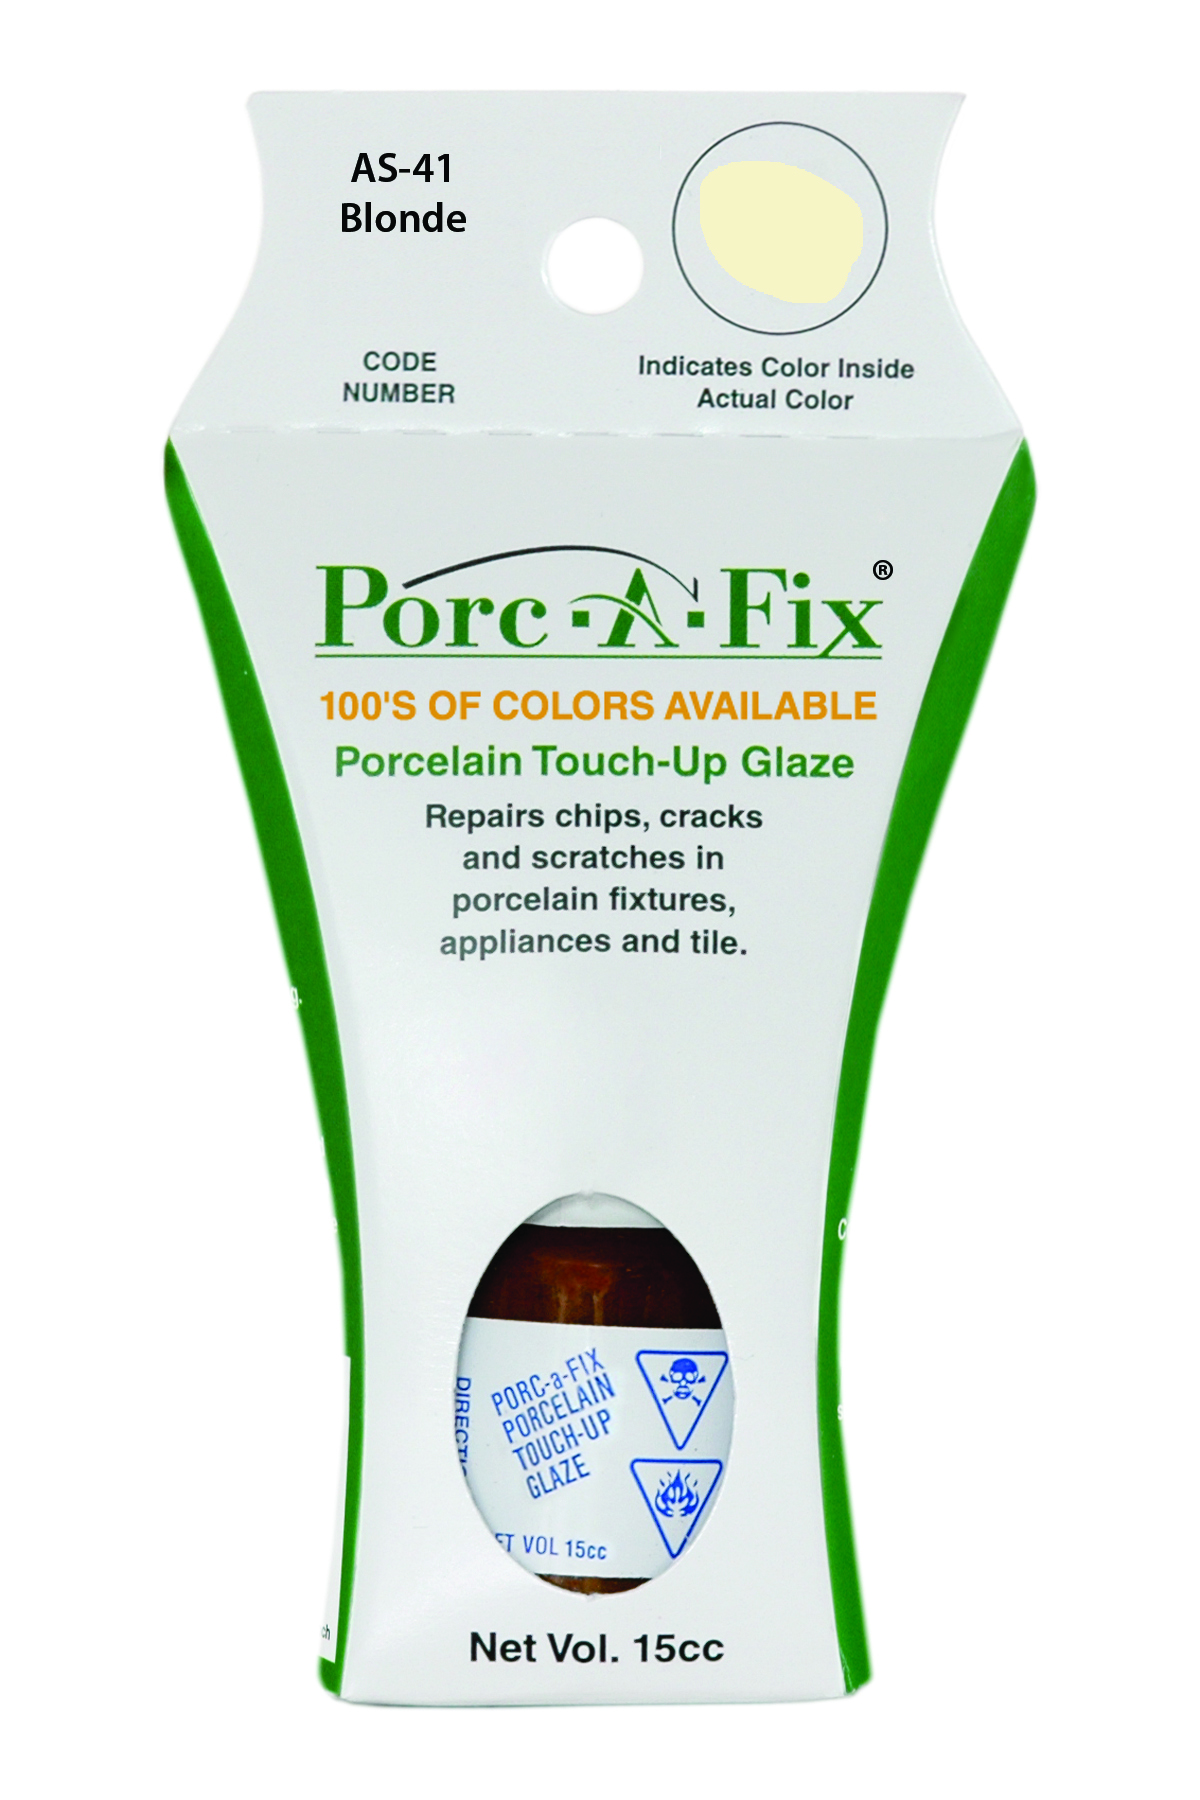 Fixture-Fix | AS-41 | Porc-A-Fix Touch-Up Glaze American Standard Blond - Compatible with American Standard 070900-1760A Touch Up Paint Kit - BLOND